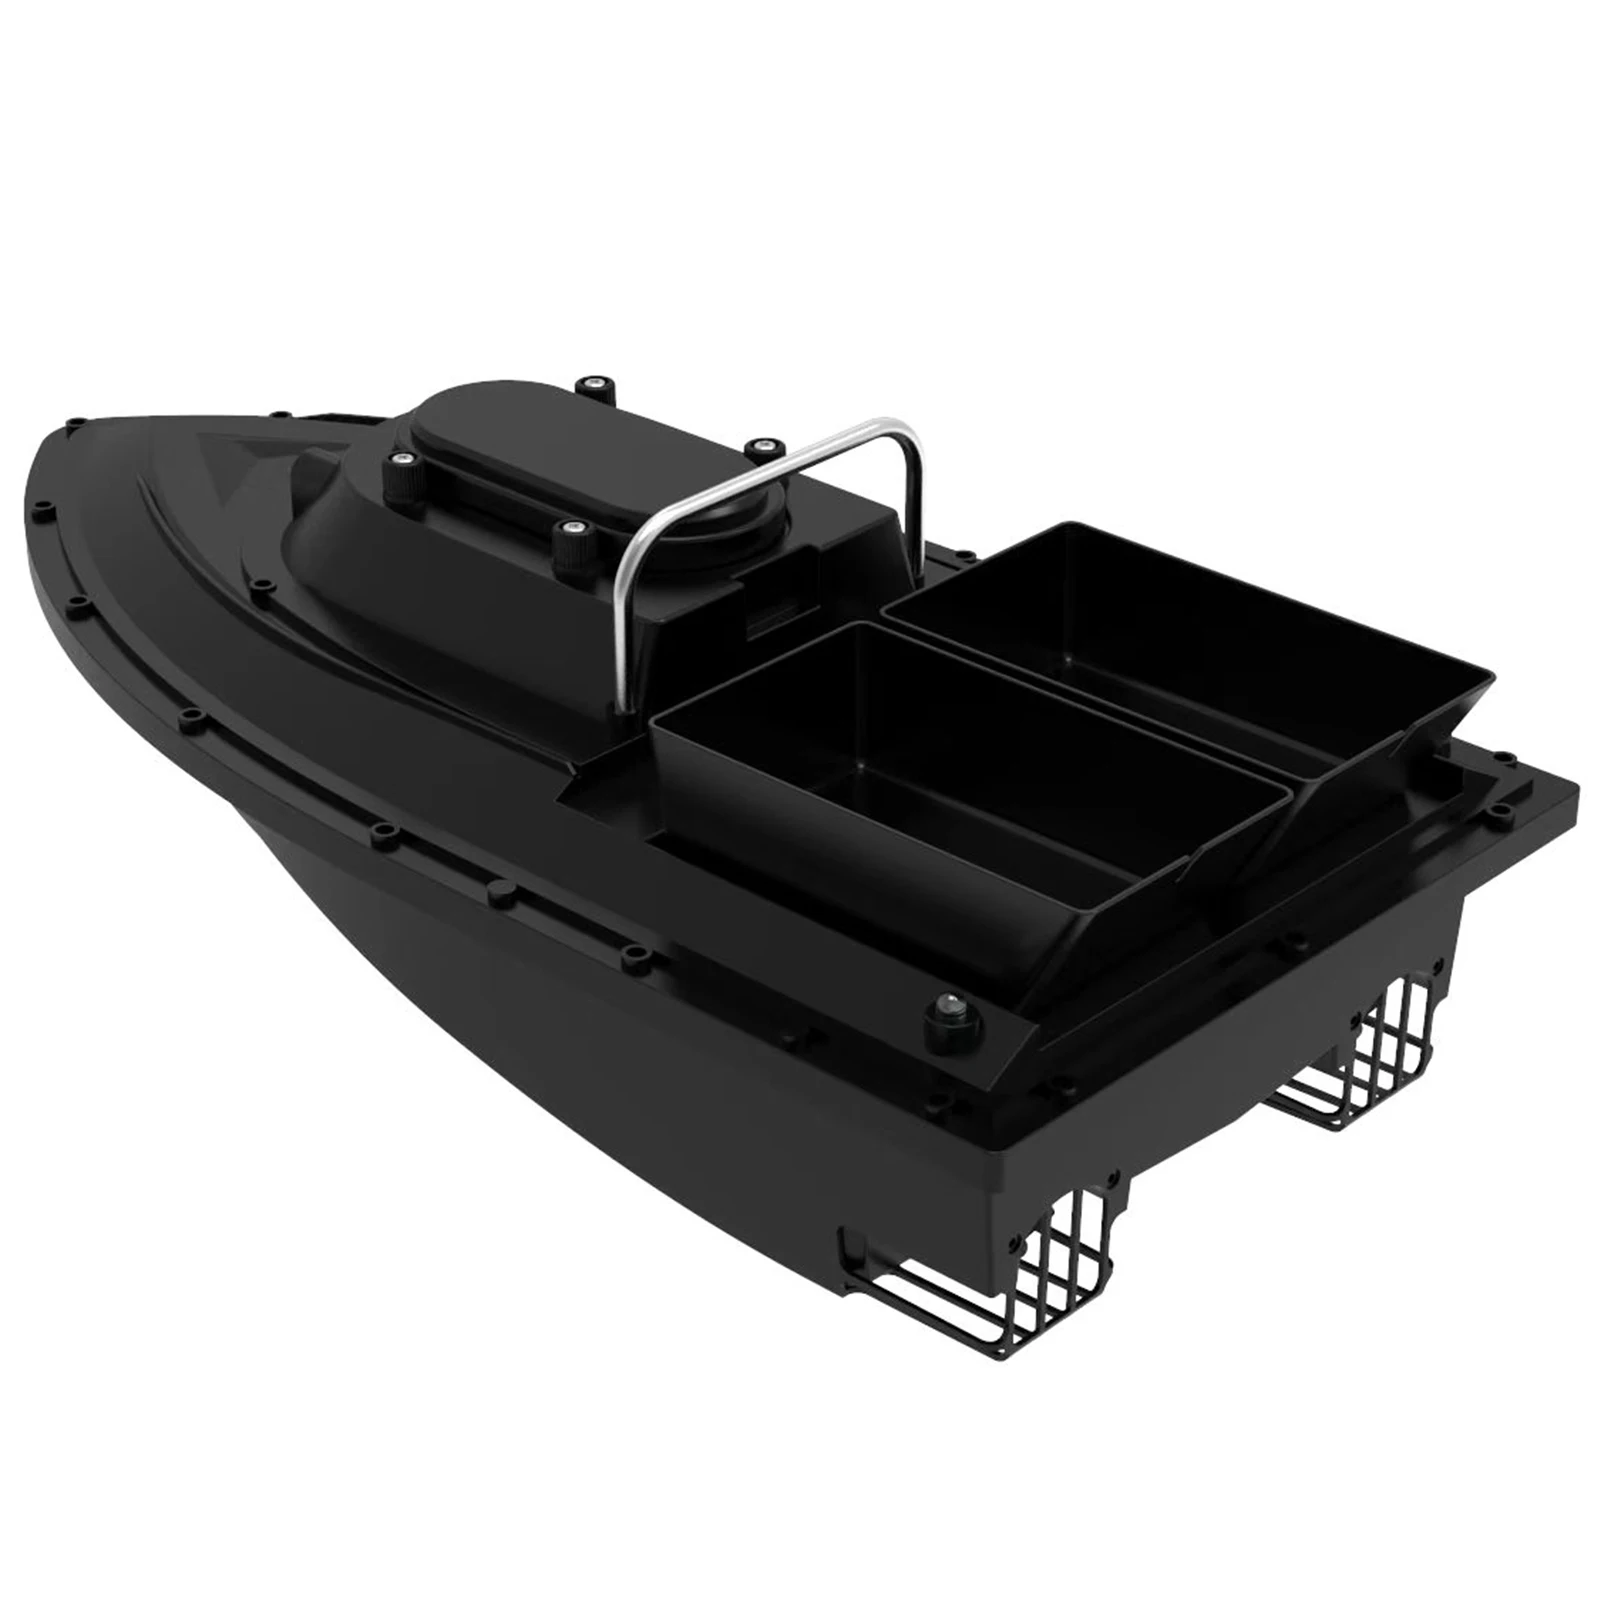 GPS Fishing Bait Boat with 3 Bait Containers Automatic Bait Boat with  400-500M Remote Range 5200mAh / 10000mAh Smart Bait Boat - AliExpress